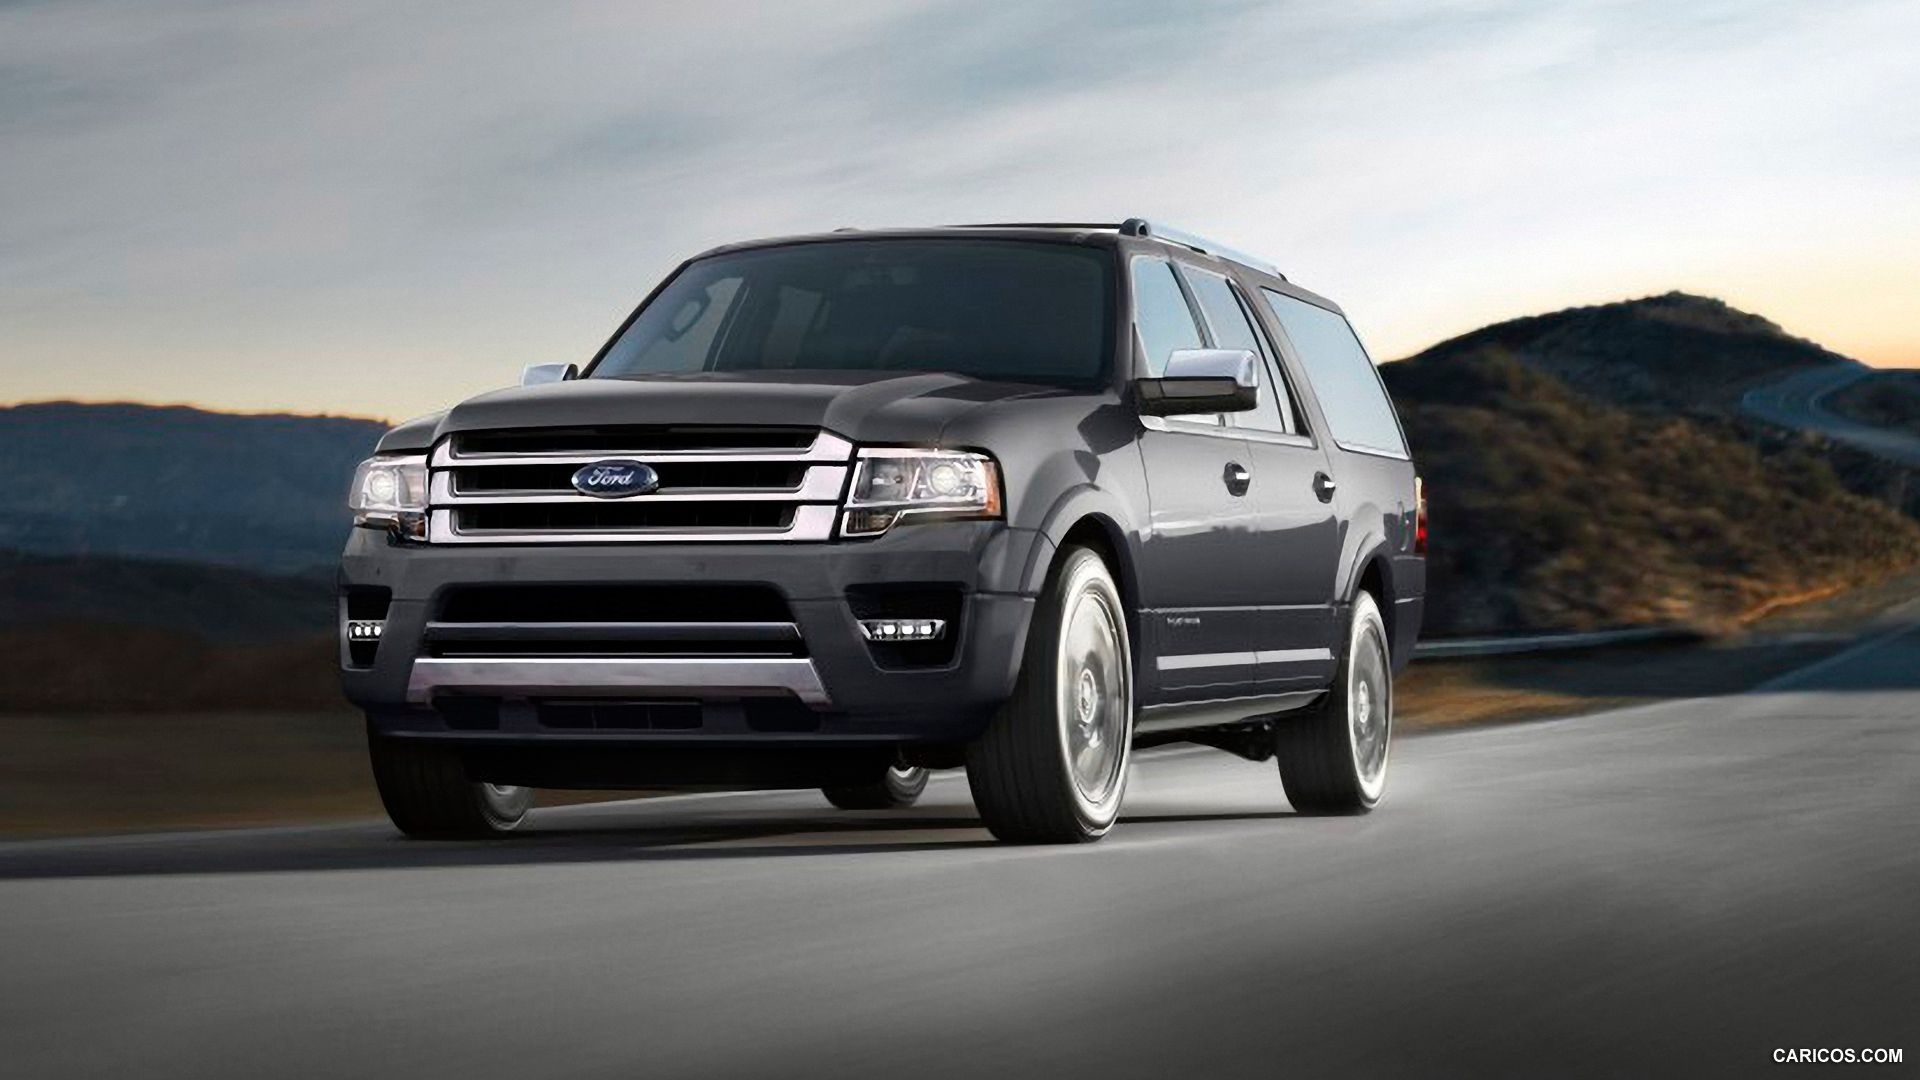 Ford Expedition. HD .caricos.com